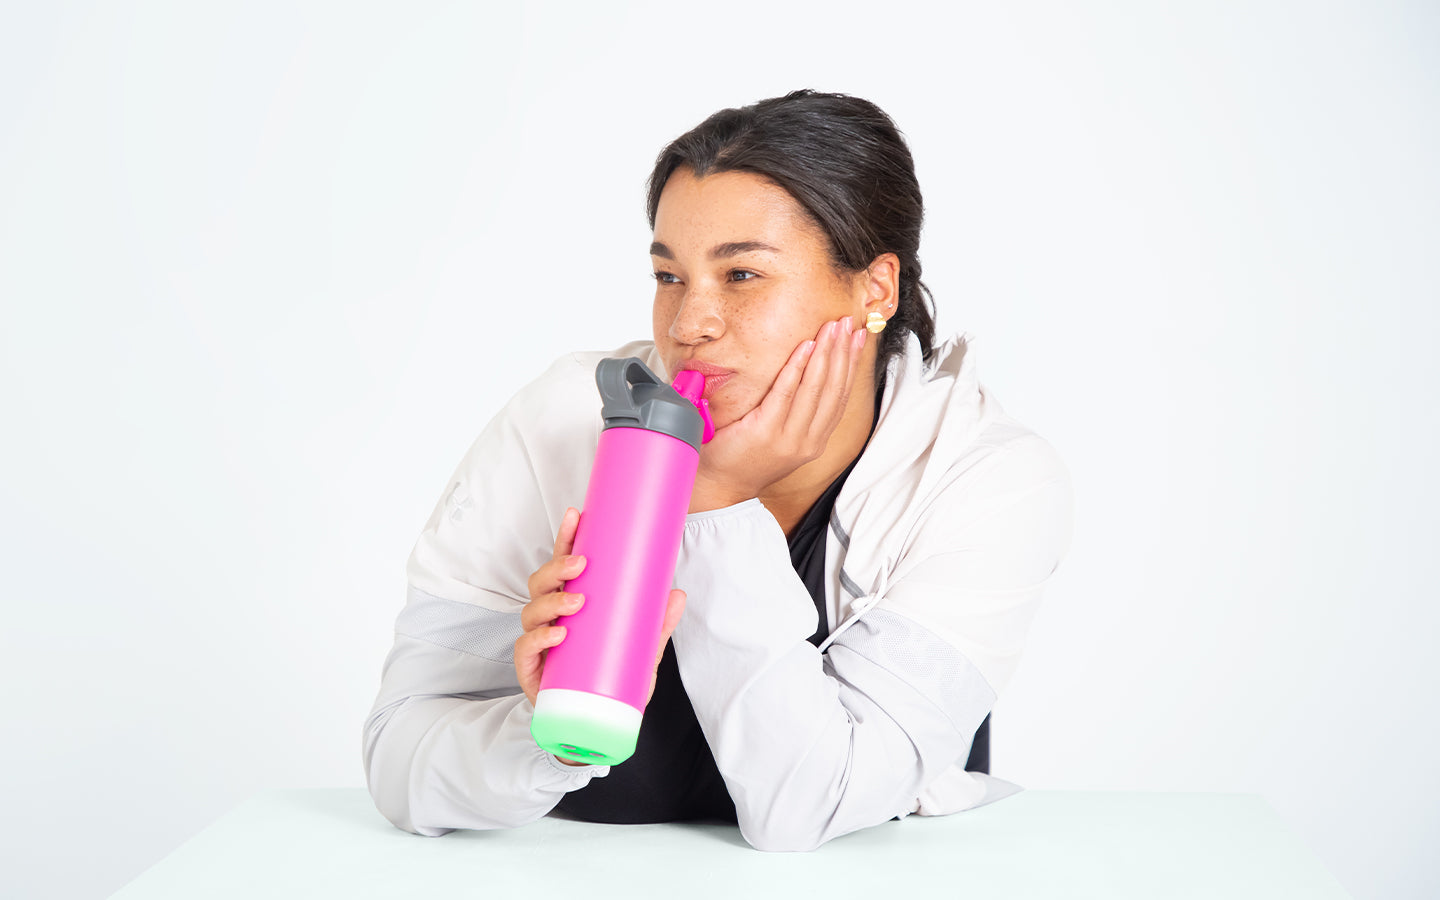 berry colored hidratespark 3 bluetooth smart water bottle next to person working-out with a kettle bell.